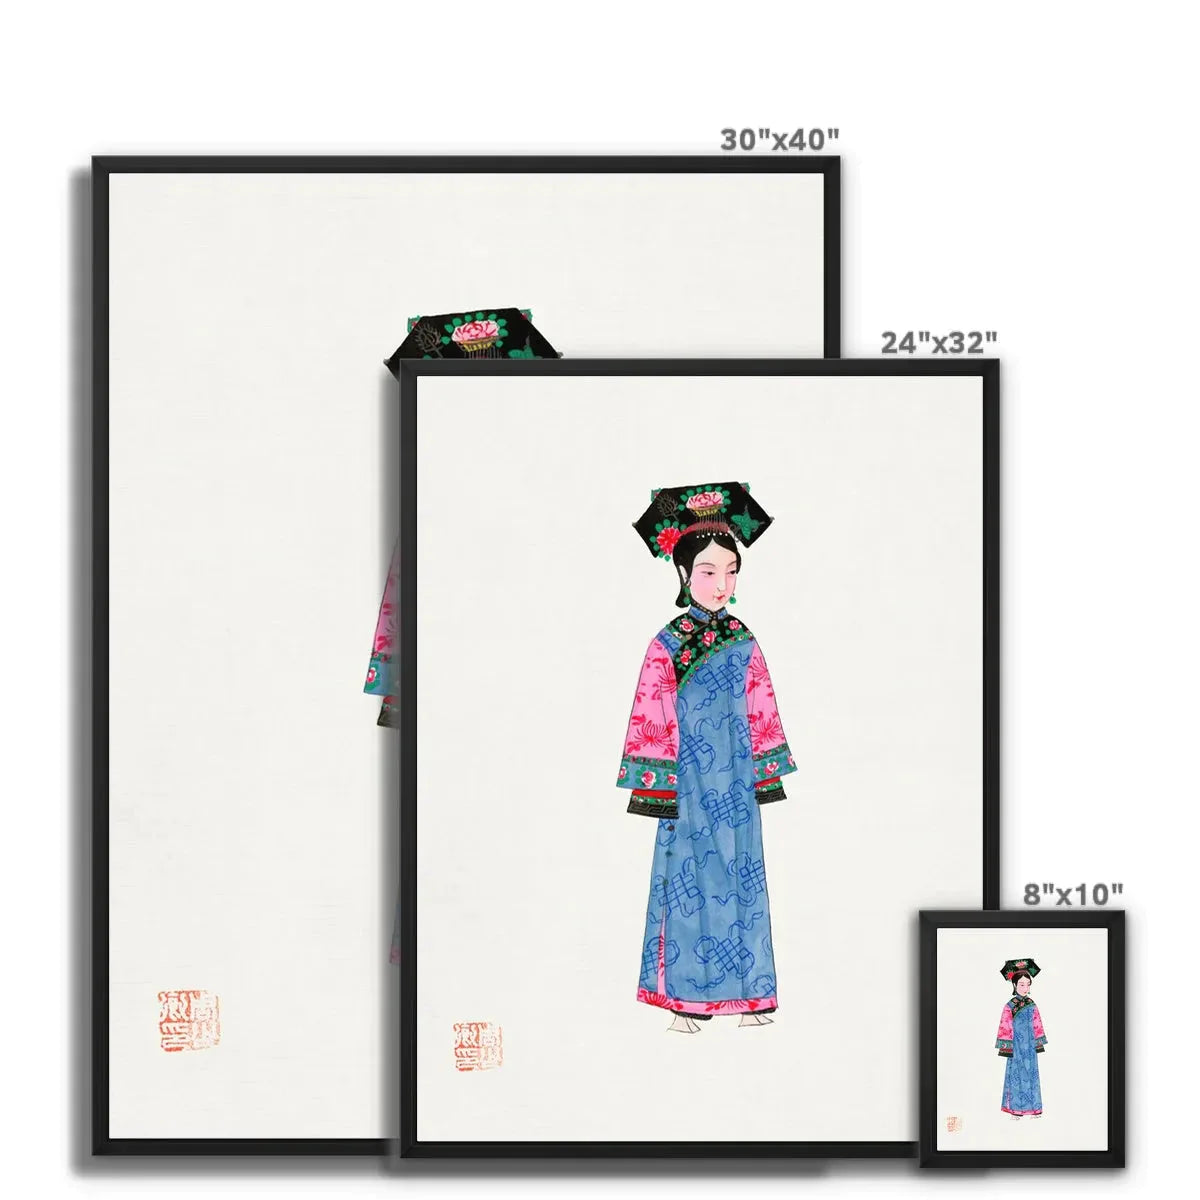 Chinese Noblewoman Too Framed Canvas - Posters Prints & Visual Artwork - Aesthetic Art